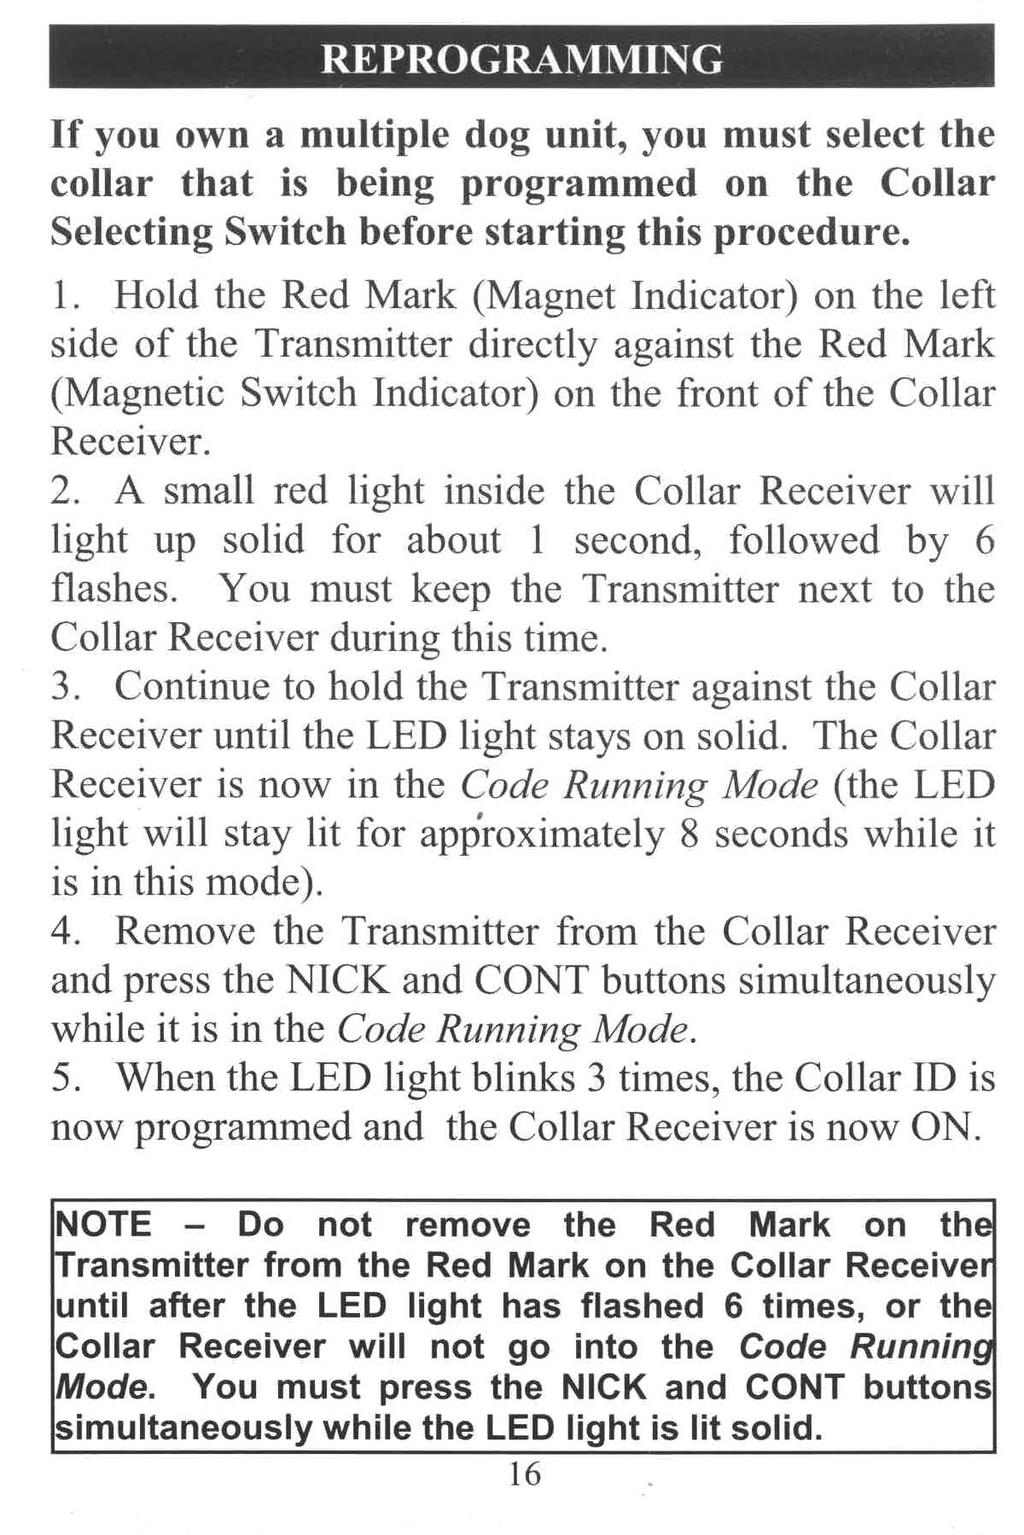 If you own a multiple dog unit, you must select the collar that is being programmed on the Collar Selecting Switch before starting this procedure. 1.